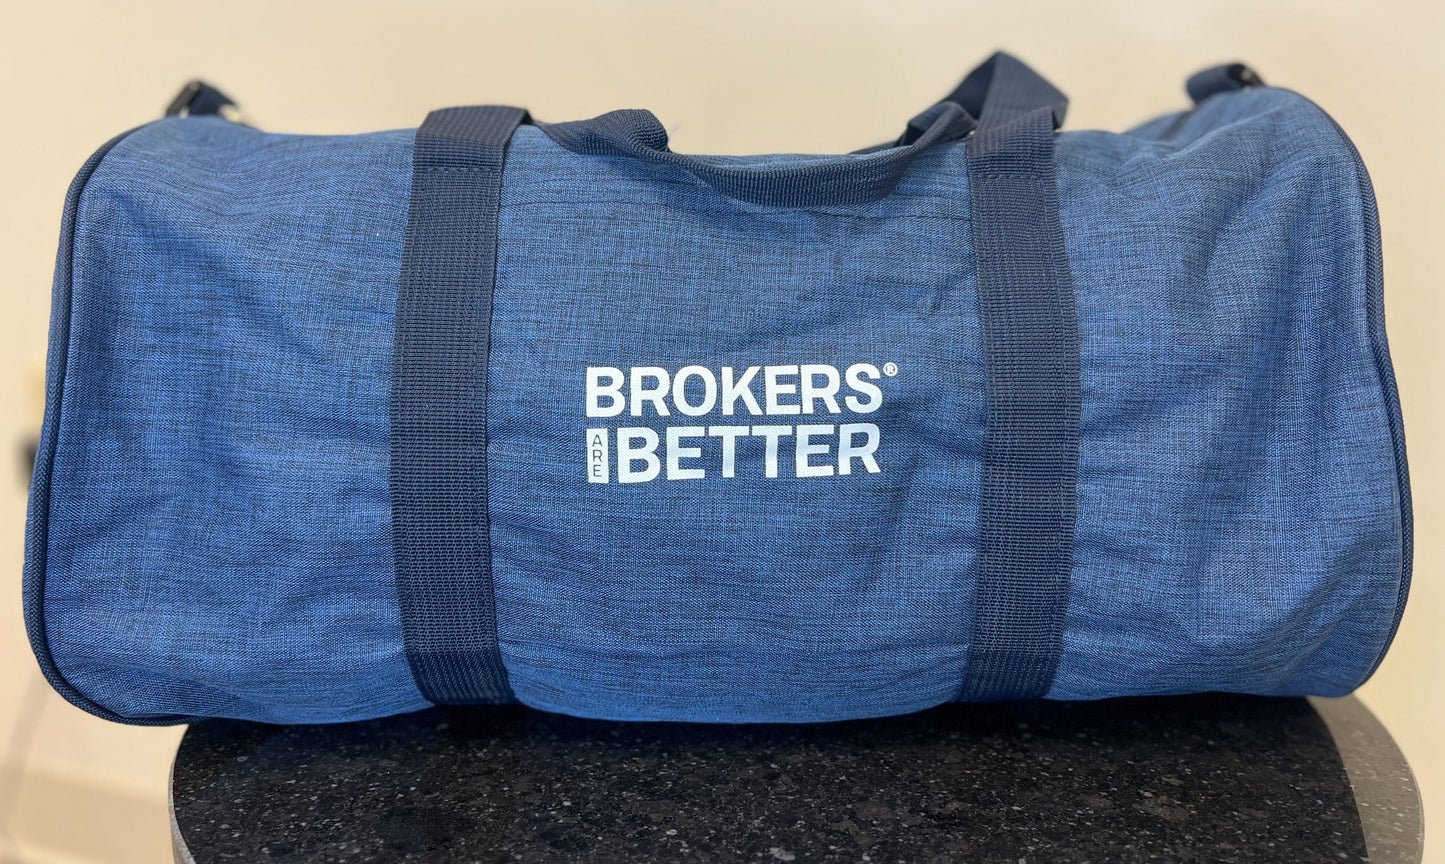 Brokers are Better Duffle Bag: BAB Blue